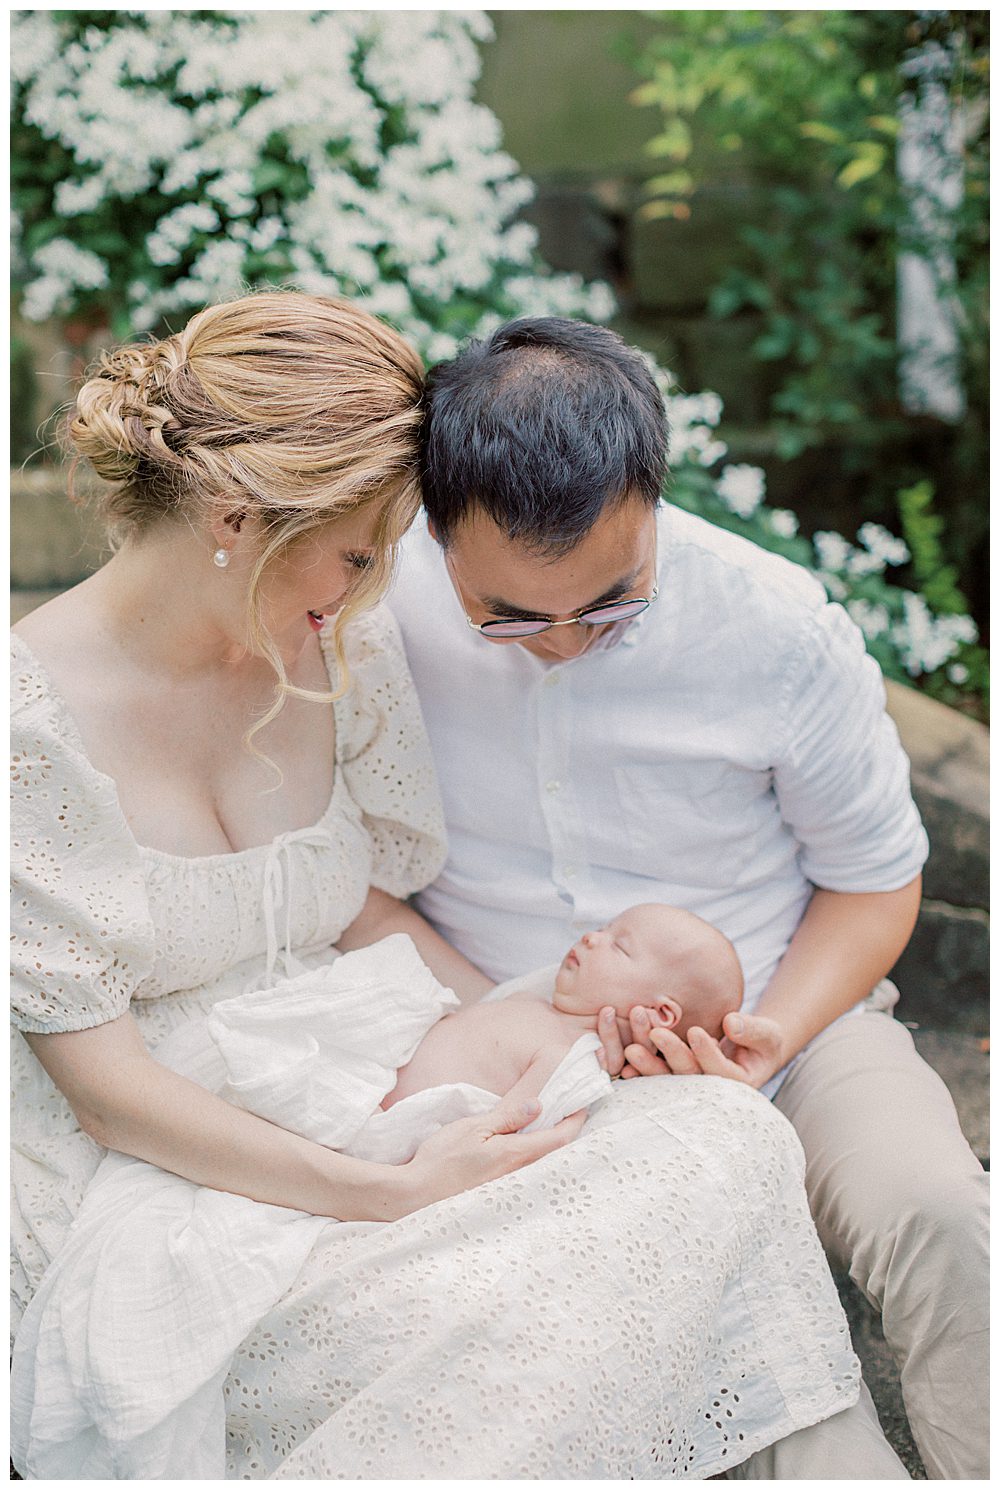 Blonde mother holds newborn daughter while sitting next to husband on steps.